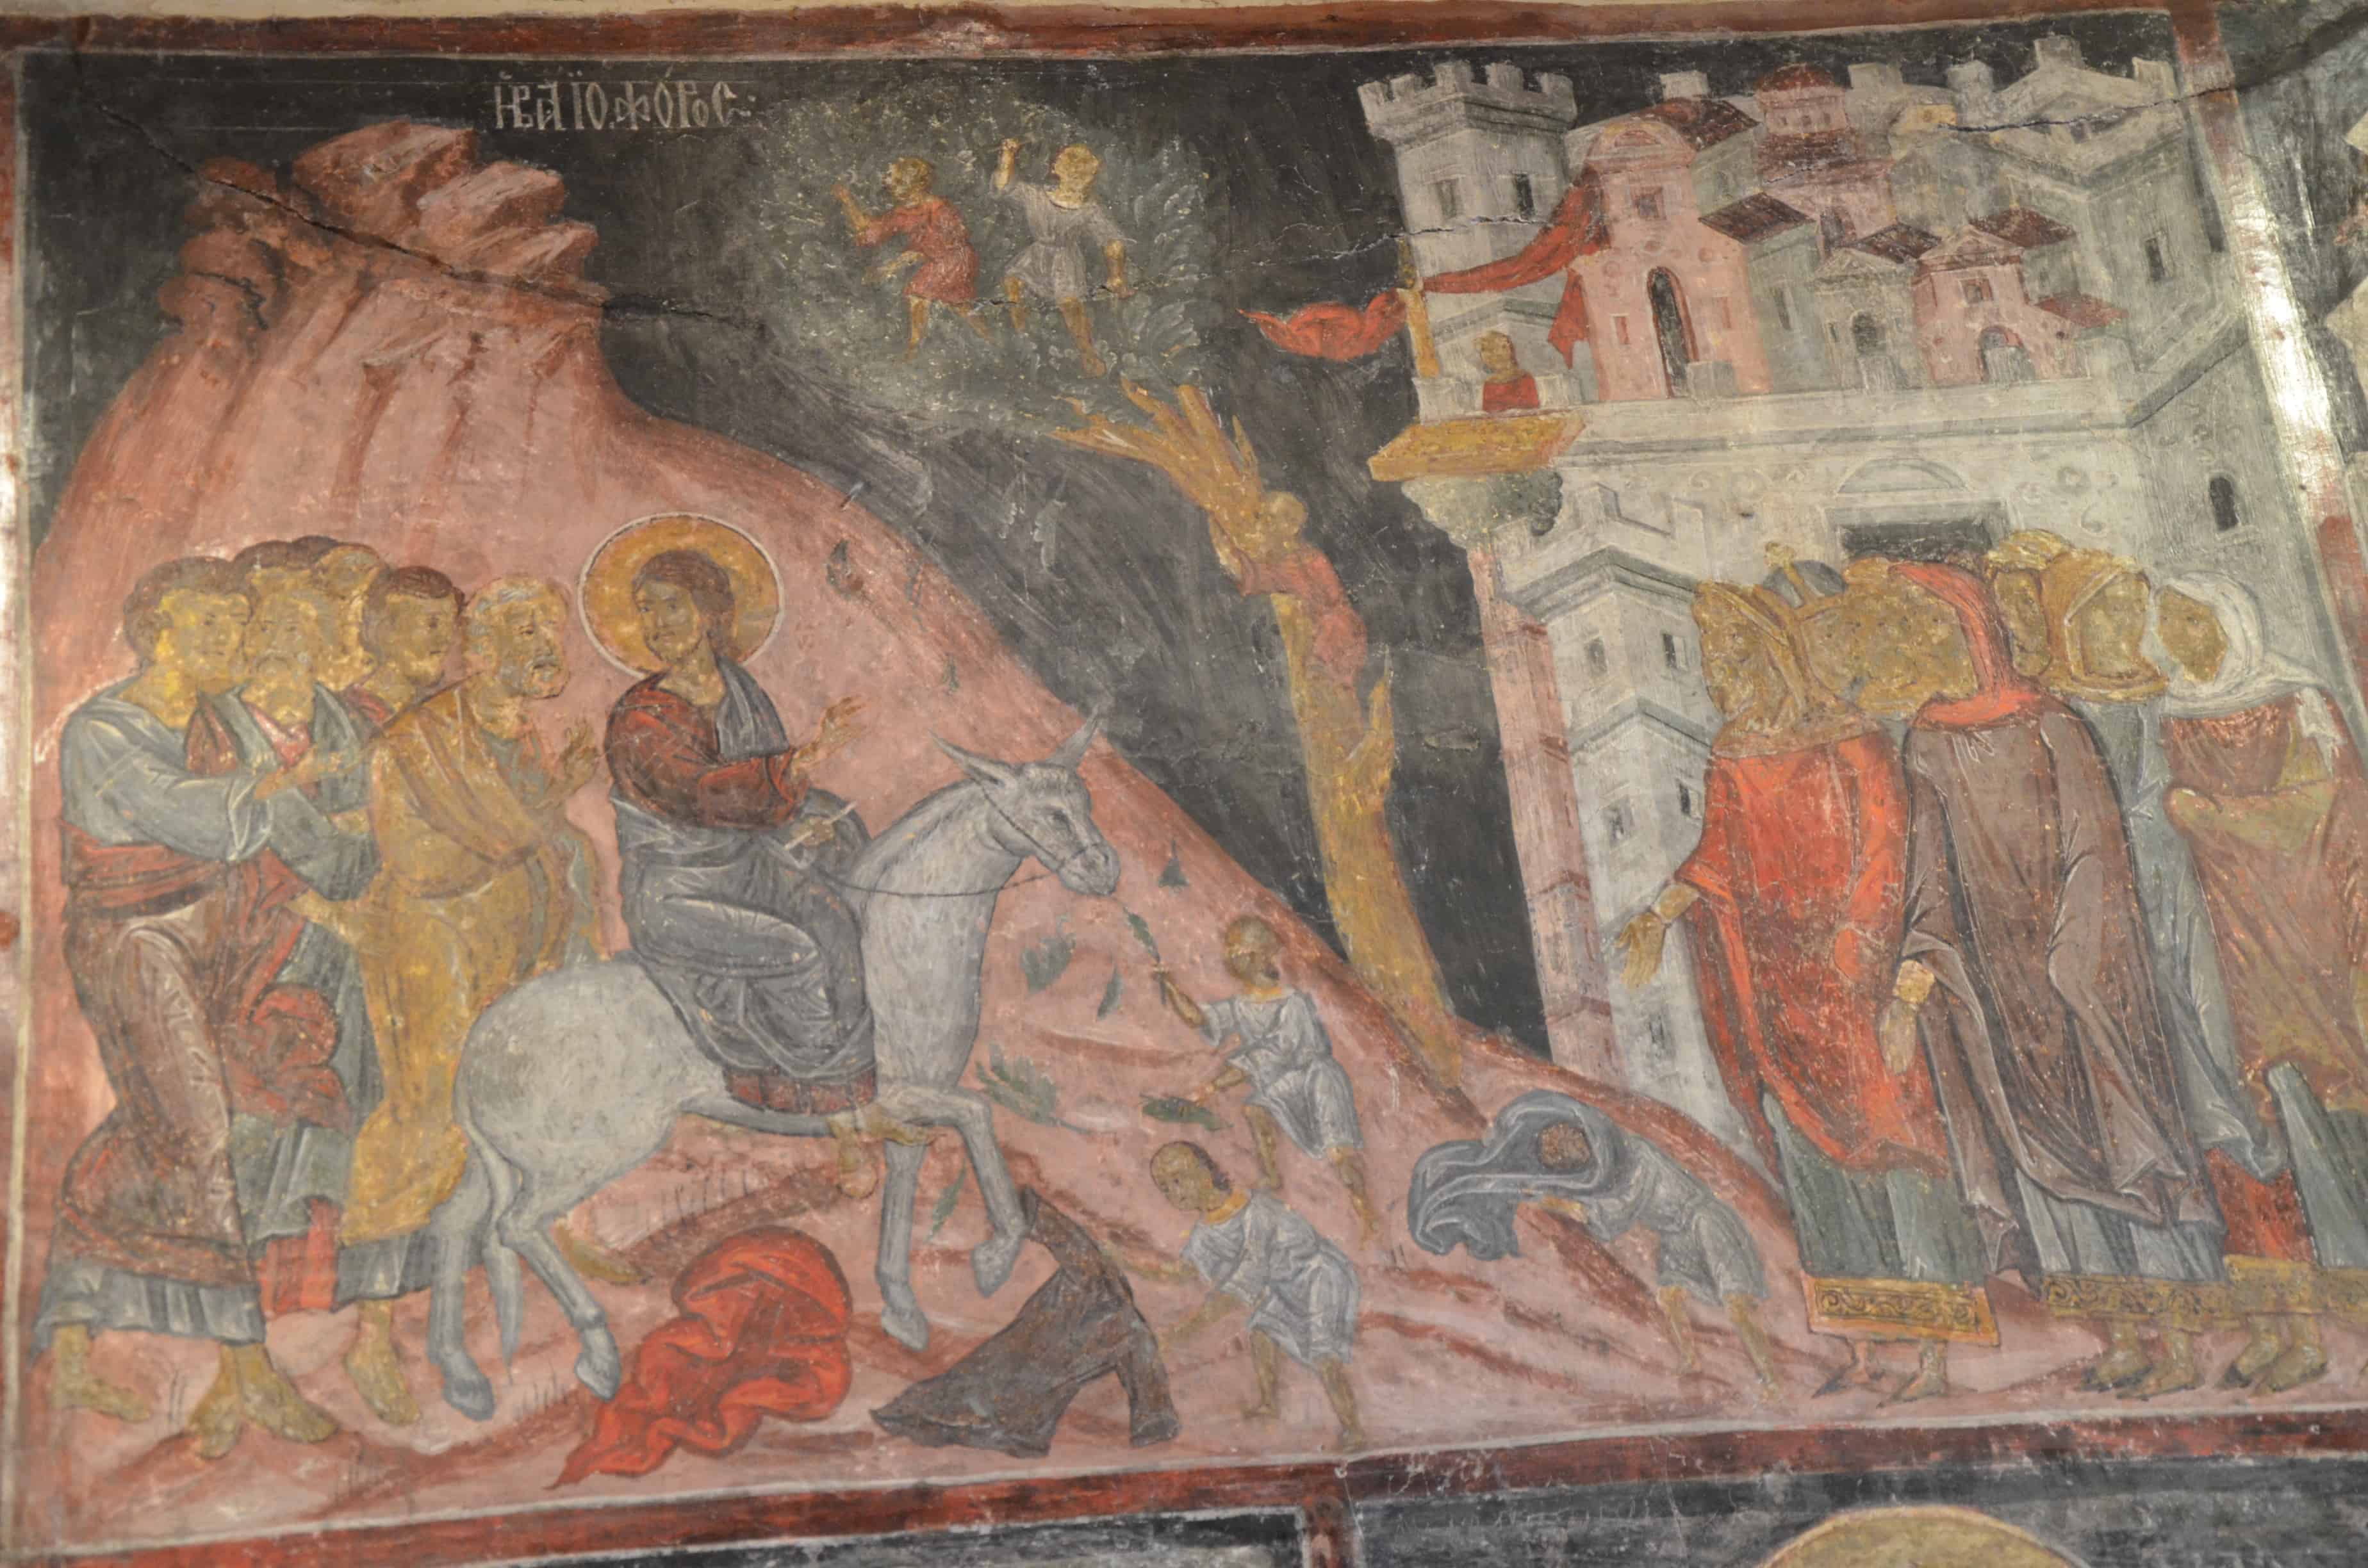 Christ entering Jerusalem on a donkey in the Church of the Holy Saviour in Nessebar, Bulgaria